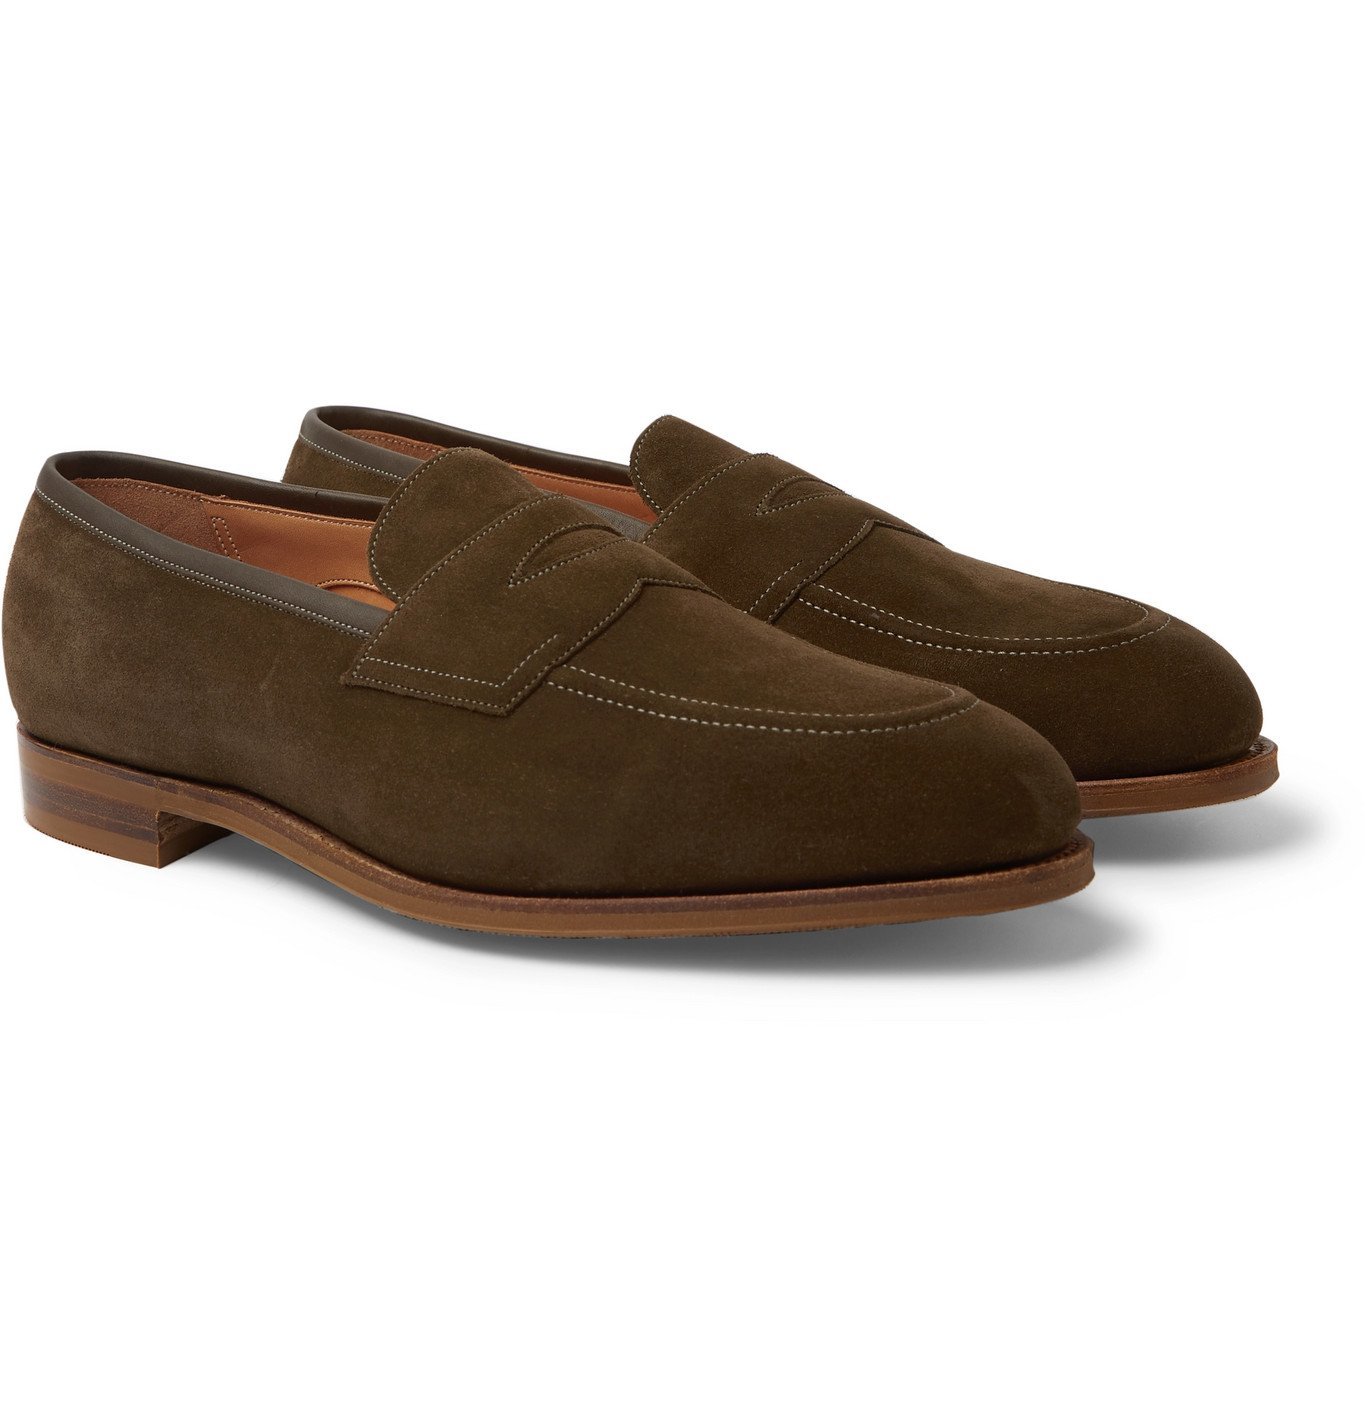 Edward Green - Piccadilly Leather Penny Loafers - Green Edward Green